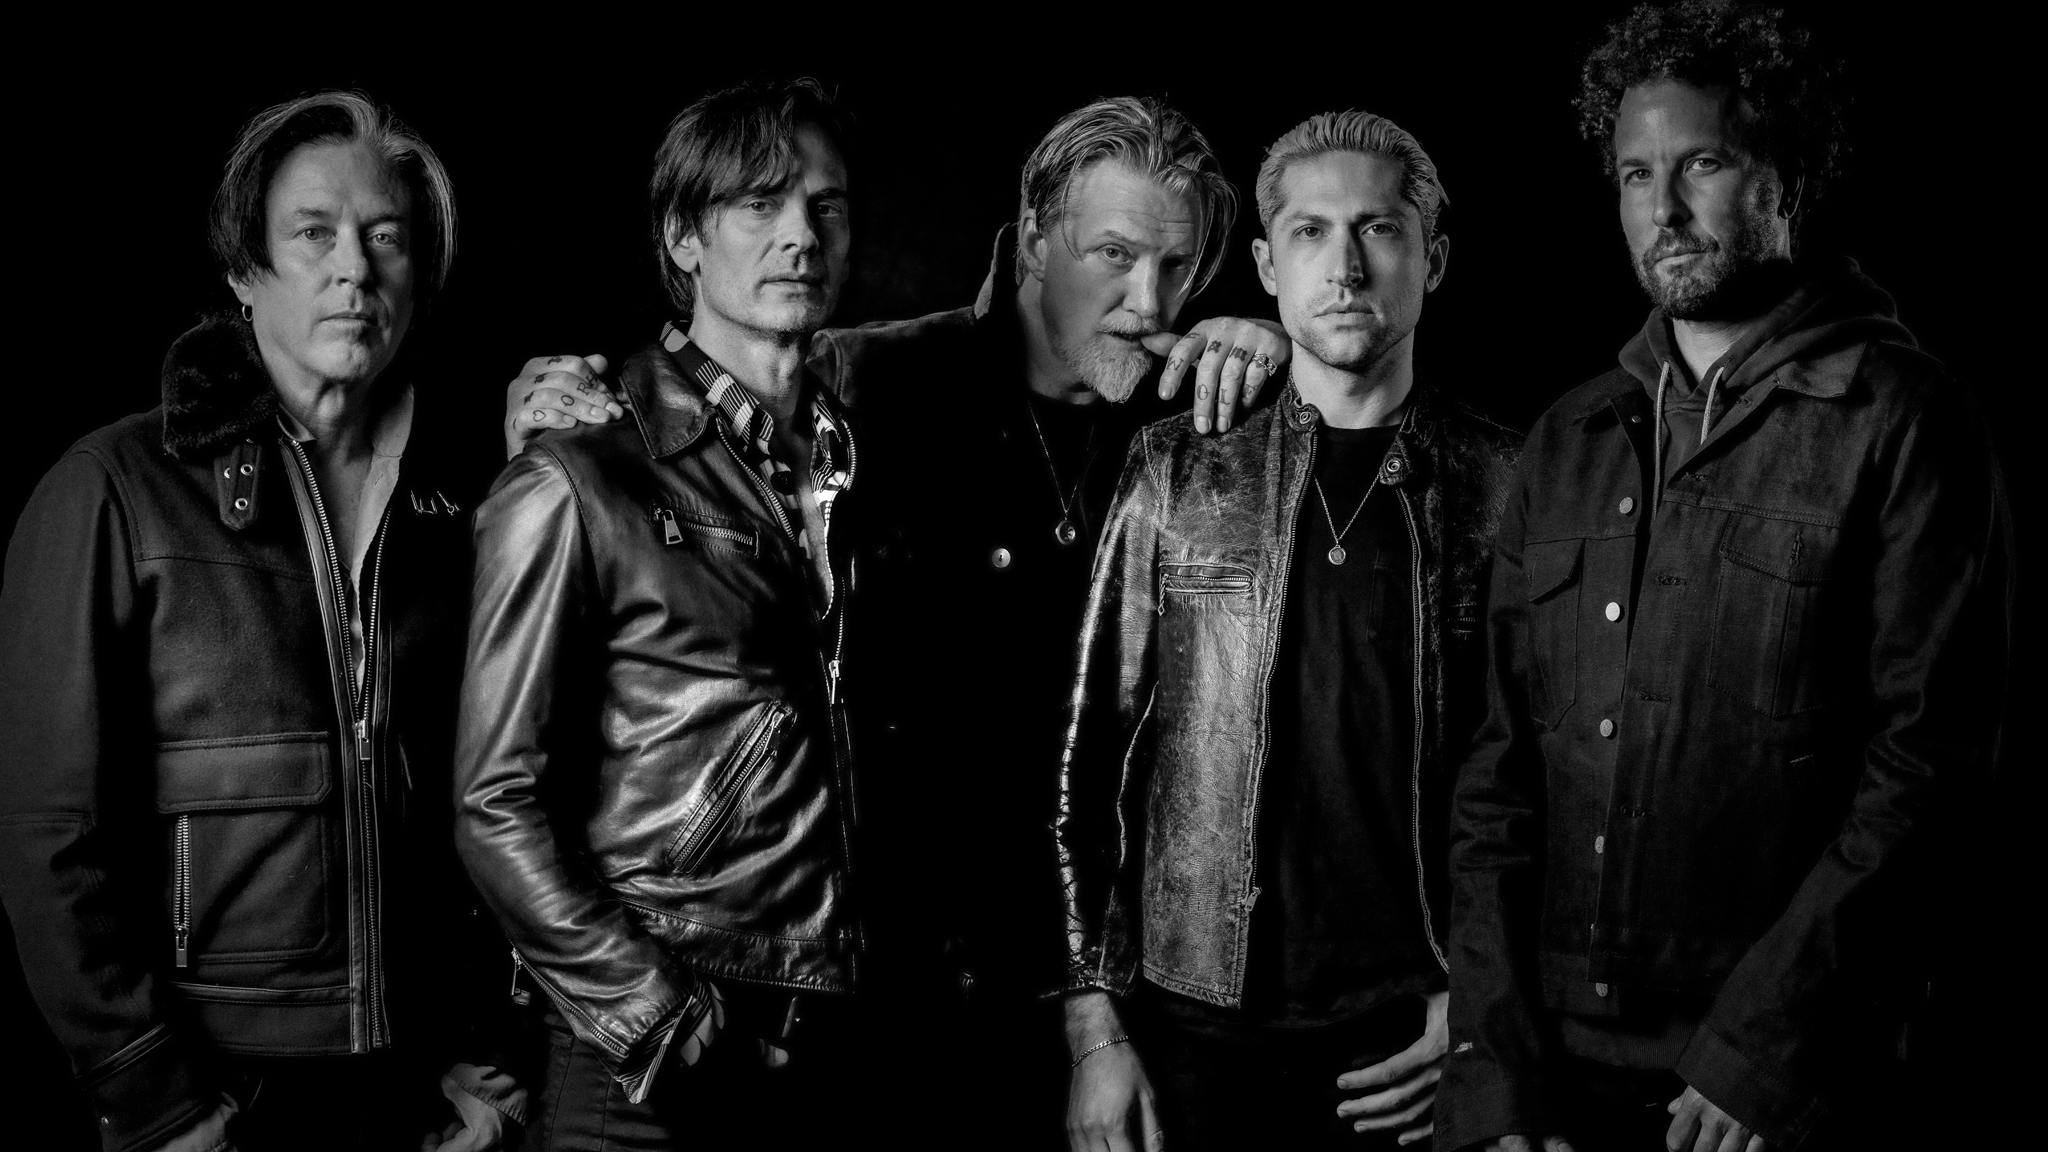 Queens Of The Stone Age drop new single ahead of surprise Glastonbury slot